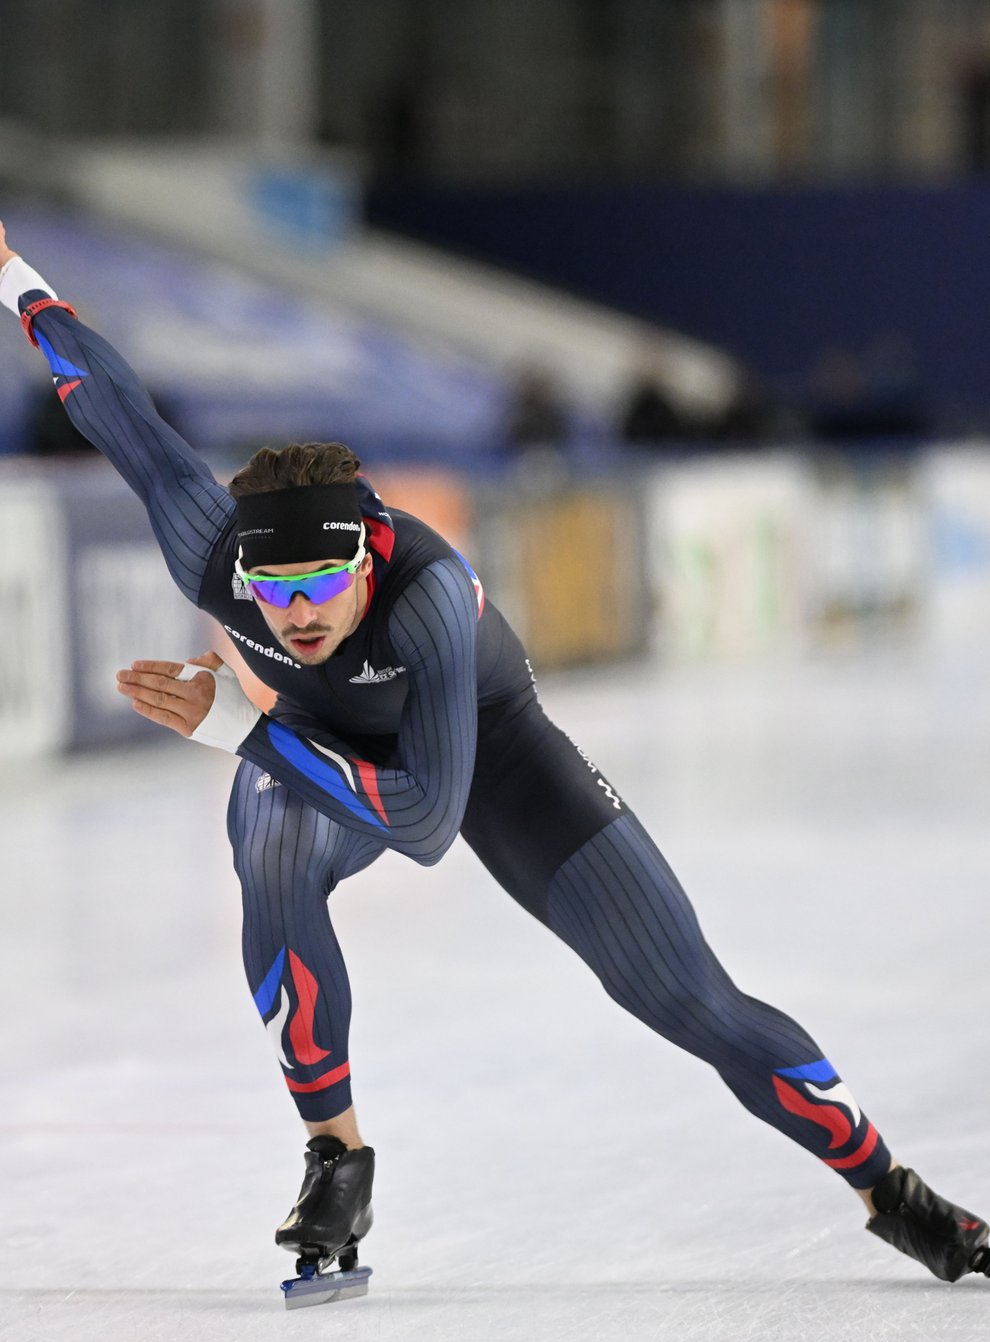 Cornelius Kersten will become the first long-track speed-skater to represent Team GB at a Winter Olympics since 1992 (Vincent Riemersma)